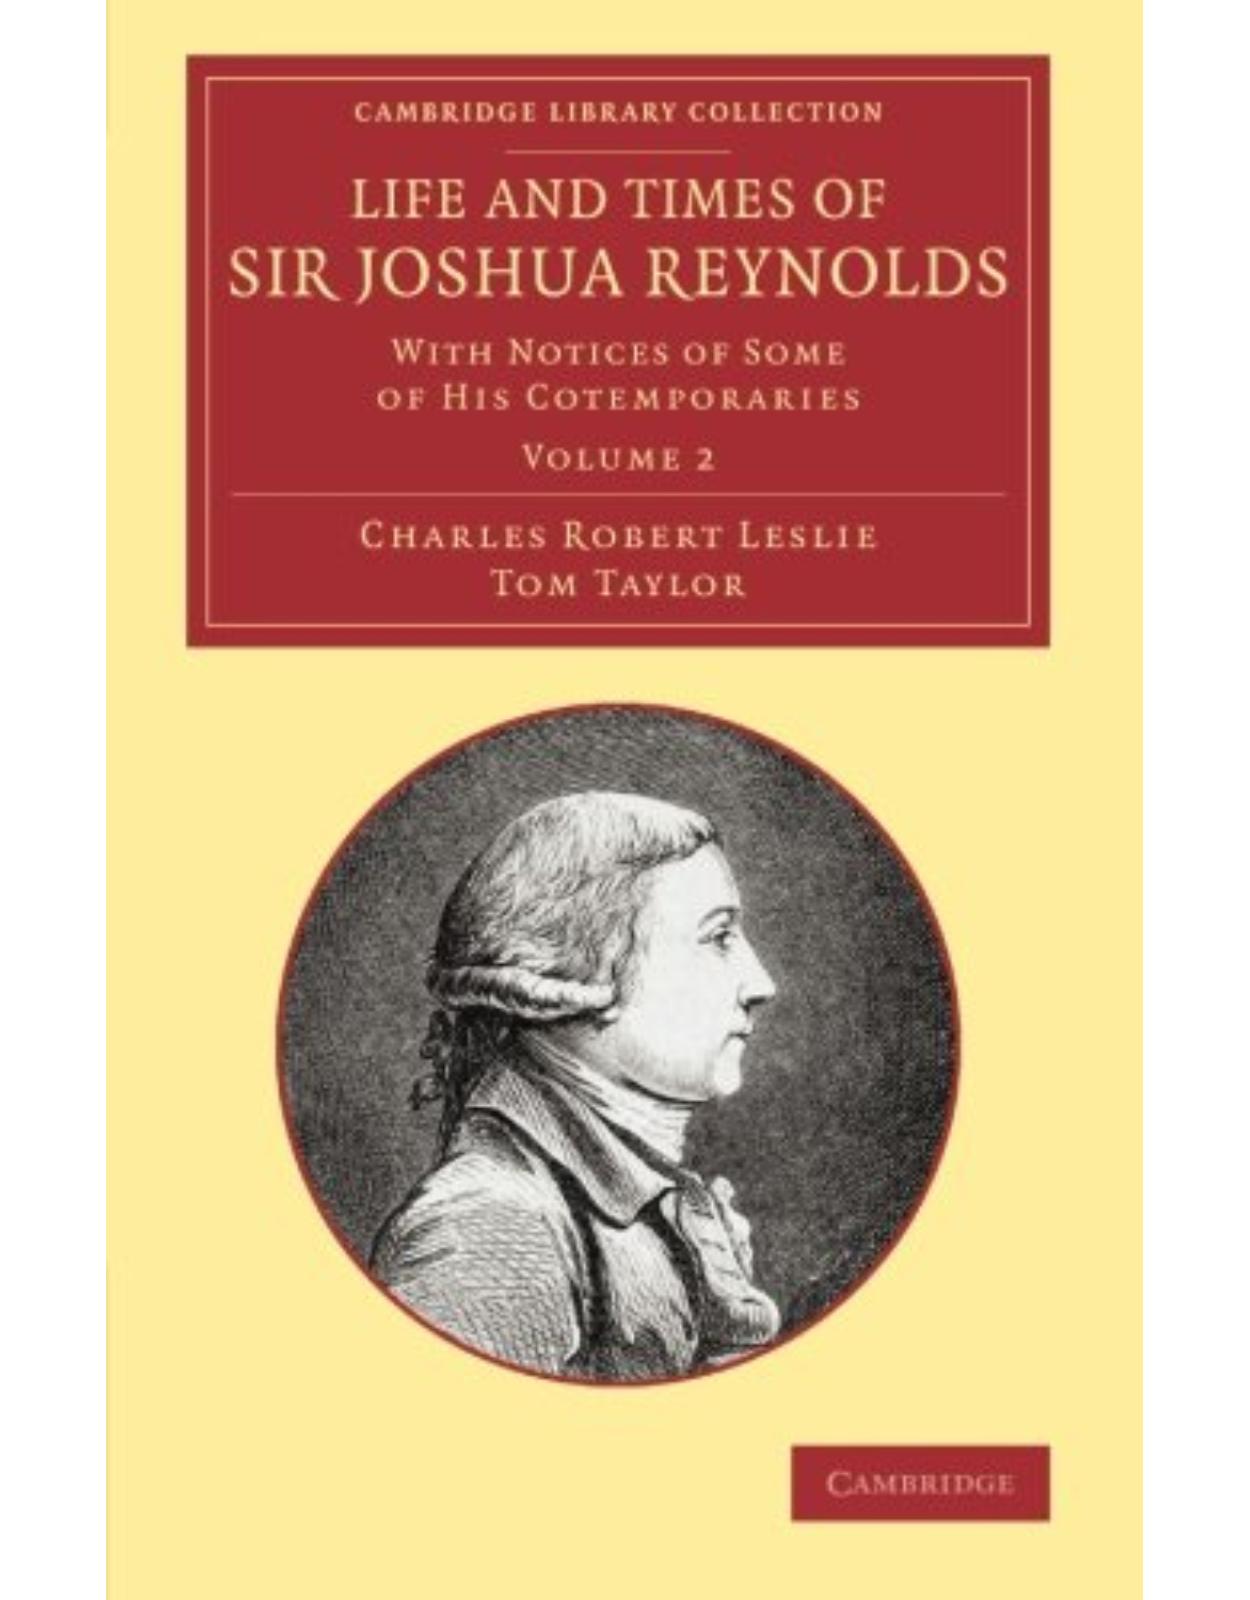 Life and Times of Sir Joshua Reynolds 2 Volume Set: With Notices of Some of his Cotemporaries